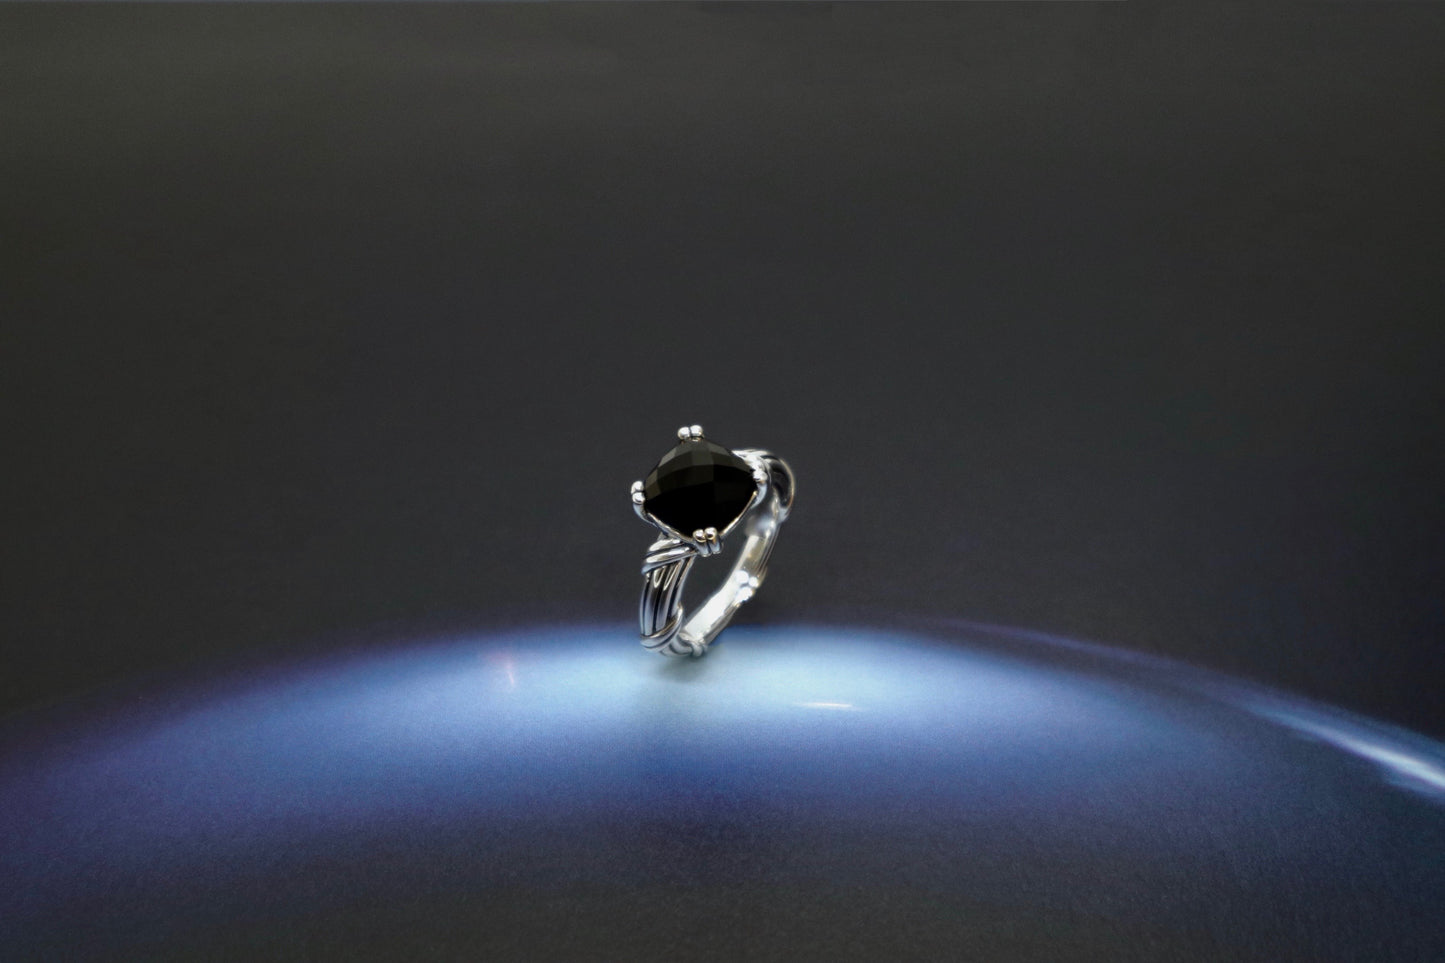 Fantasies Black Onyx Cocktail Ring in sterling silver 10mm